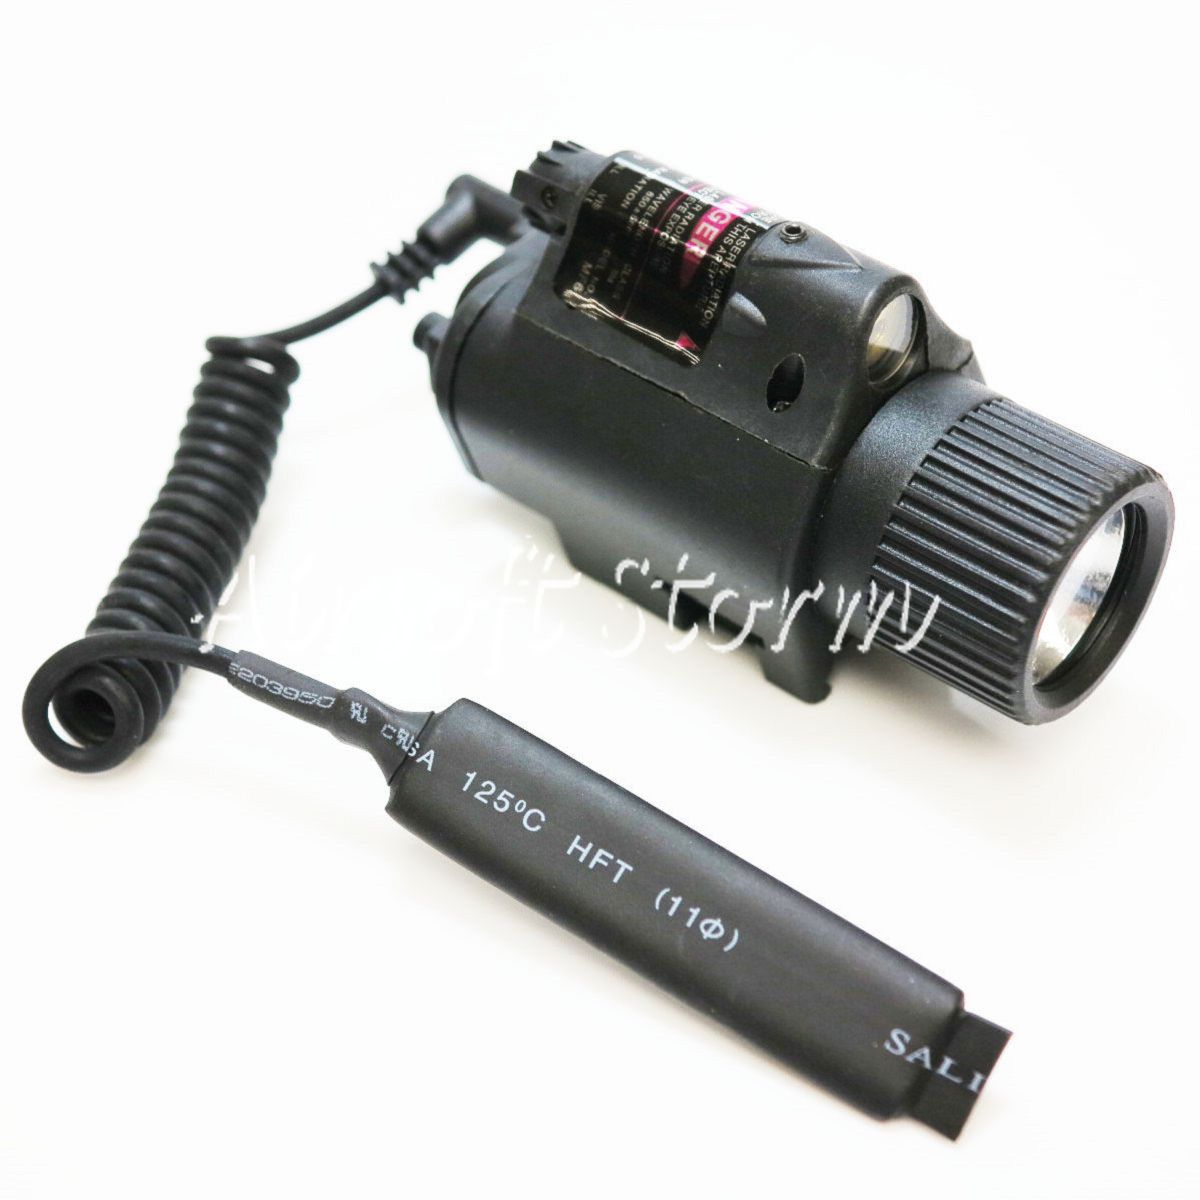 AEG Shooting Gear 2in1 65Lm Xenon Tactical Flashlight & Red Laser - Click Image to Close